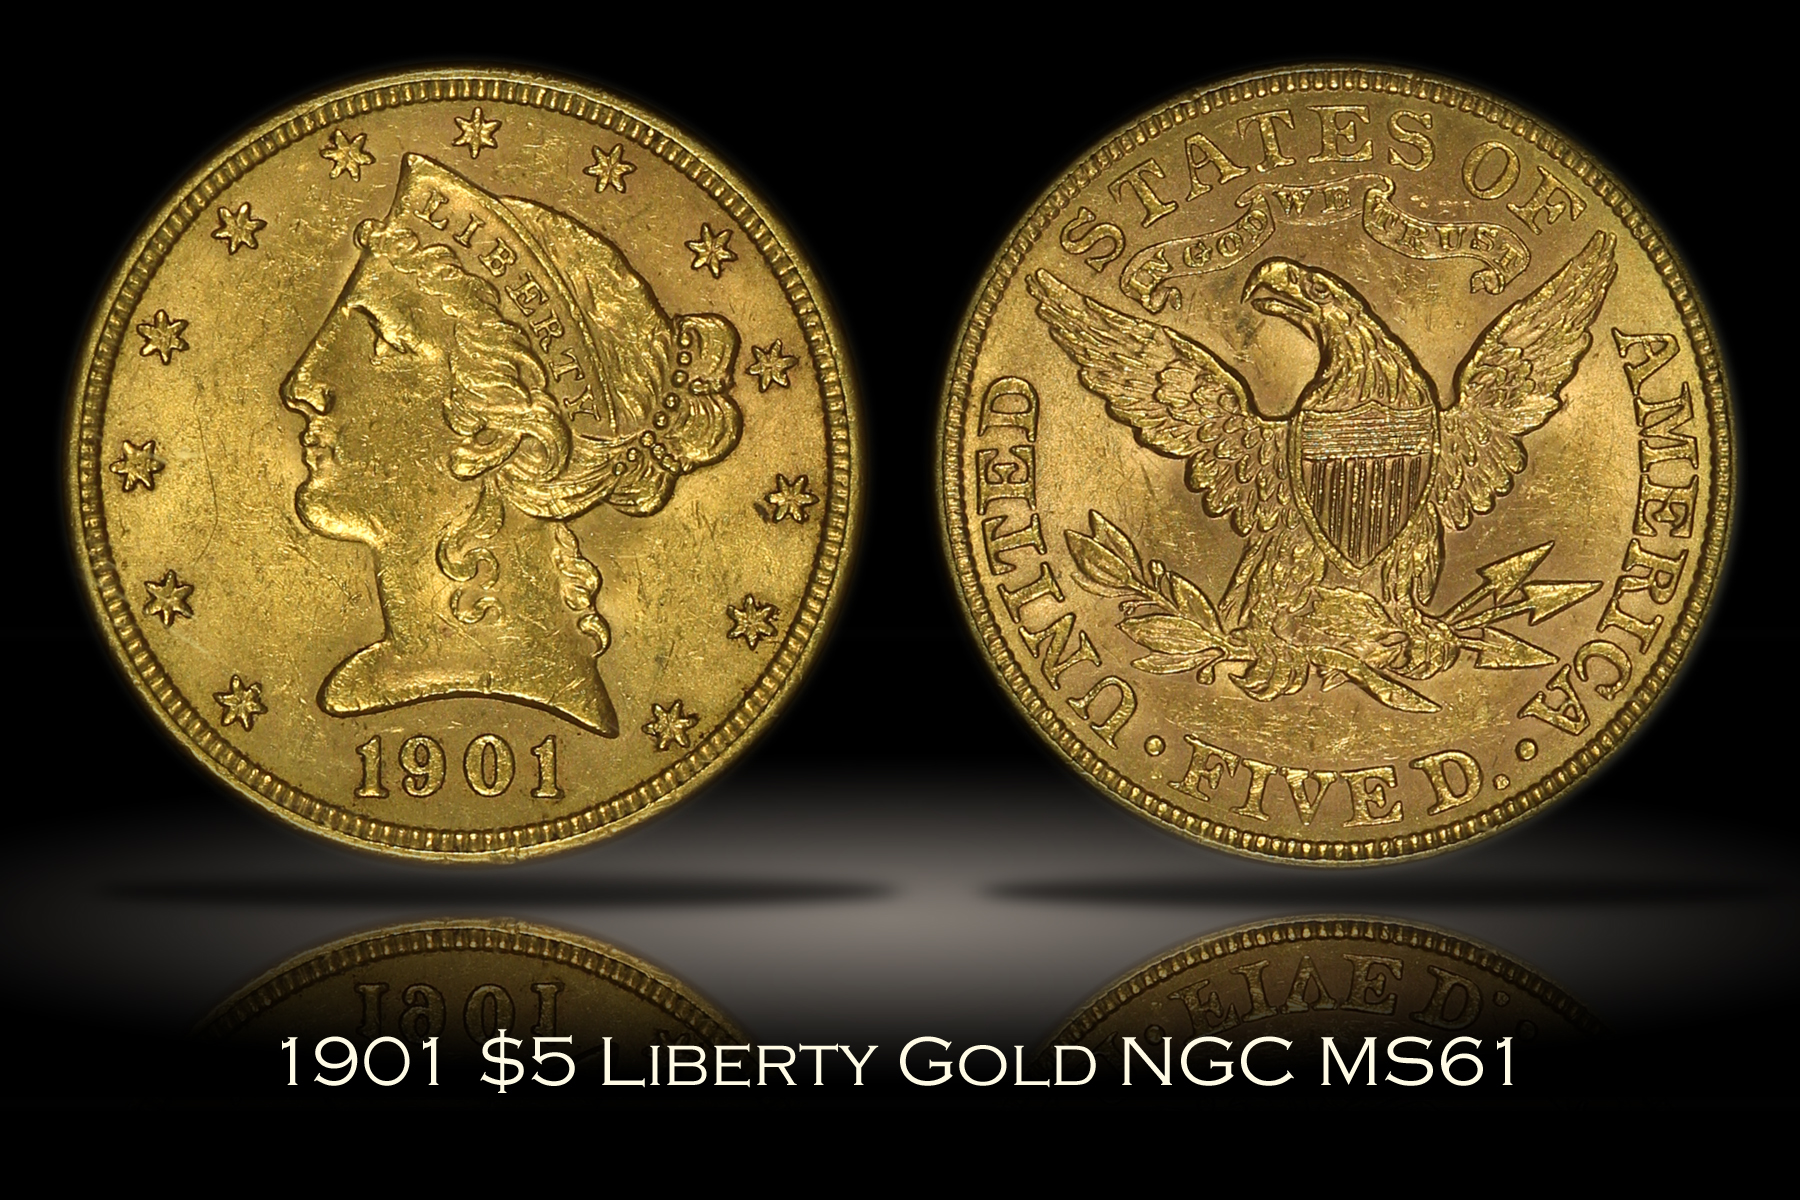 Michael Kittle Rare Coins - 1901 $5 Liberty Gold NGC MS61